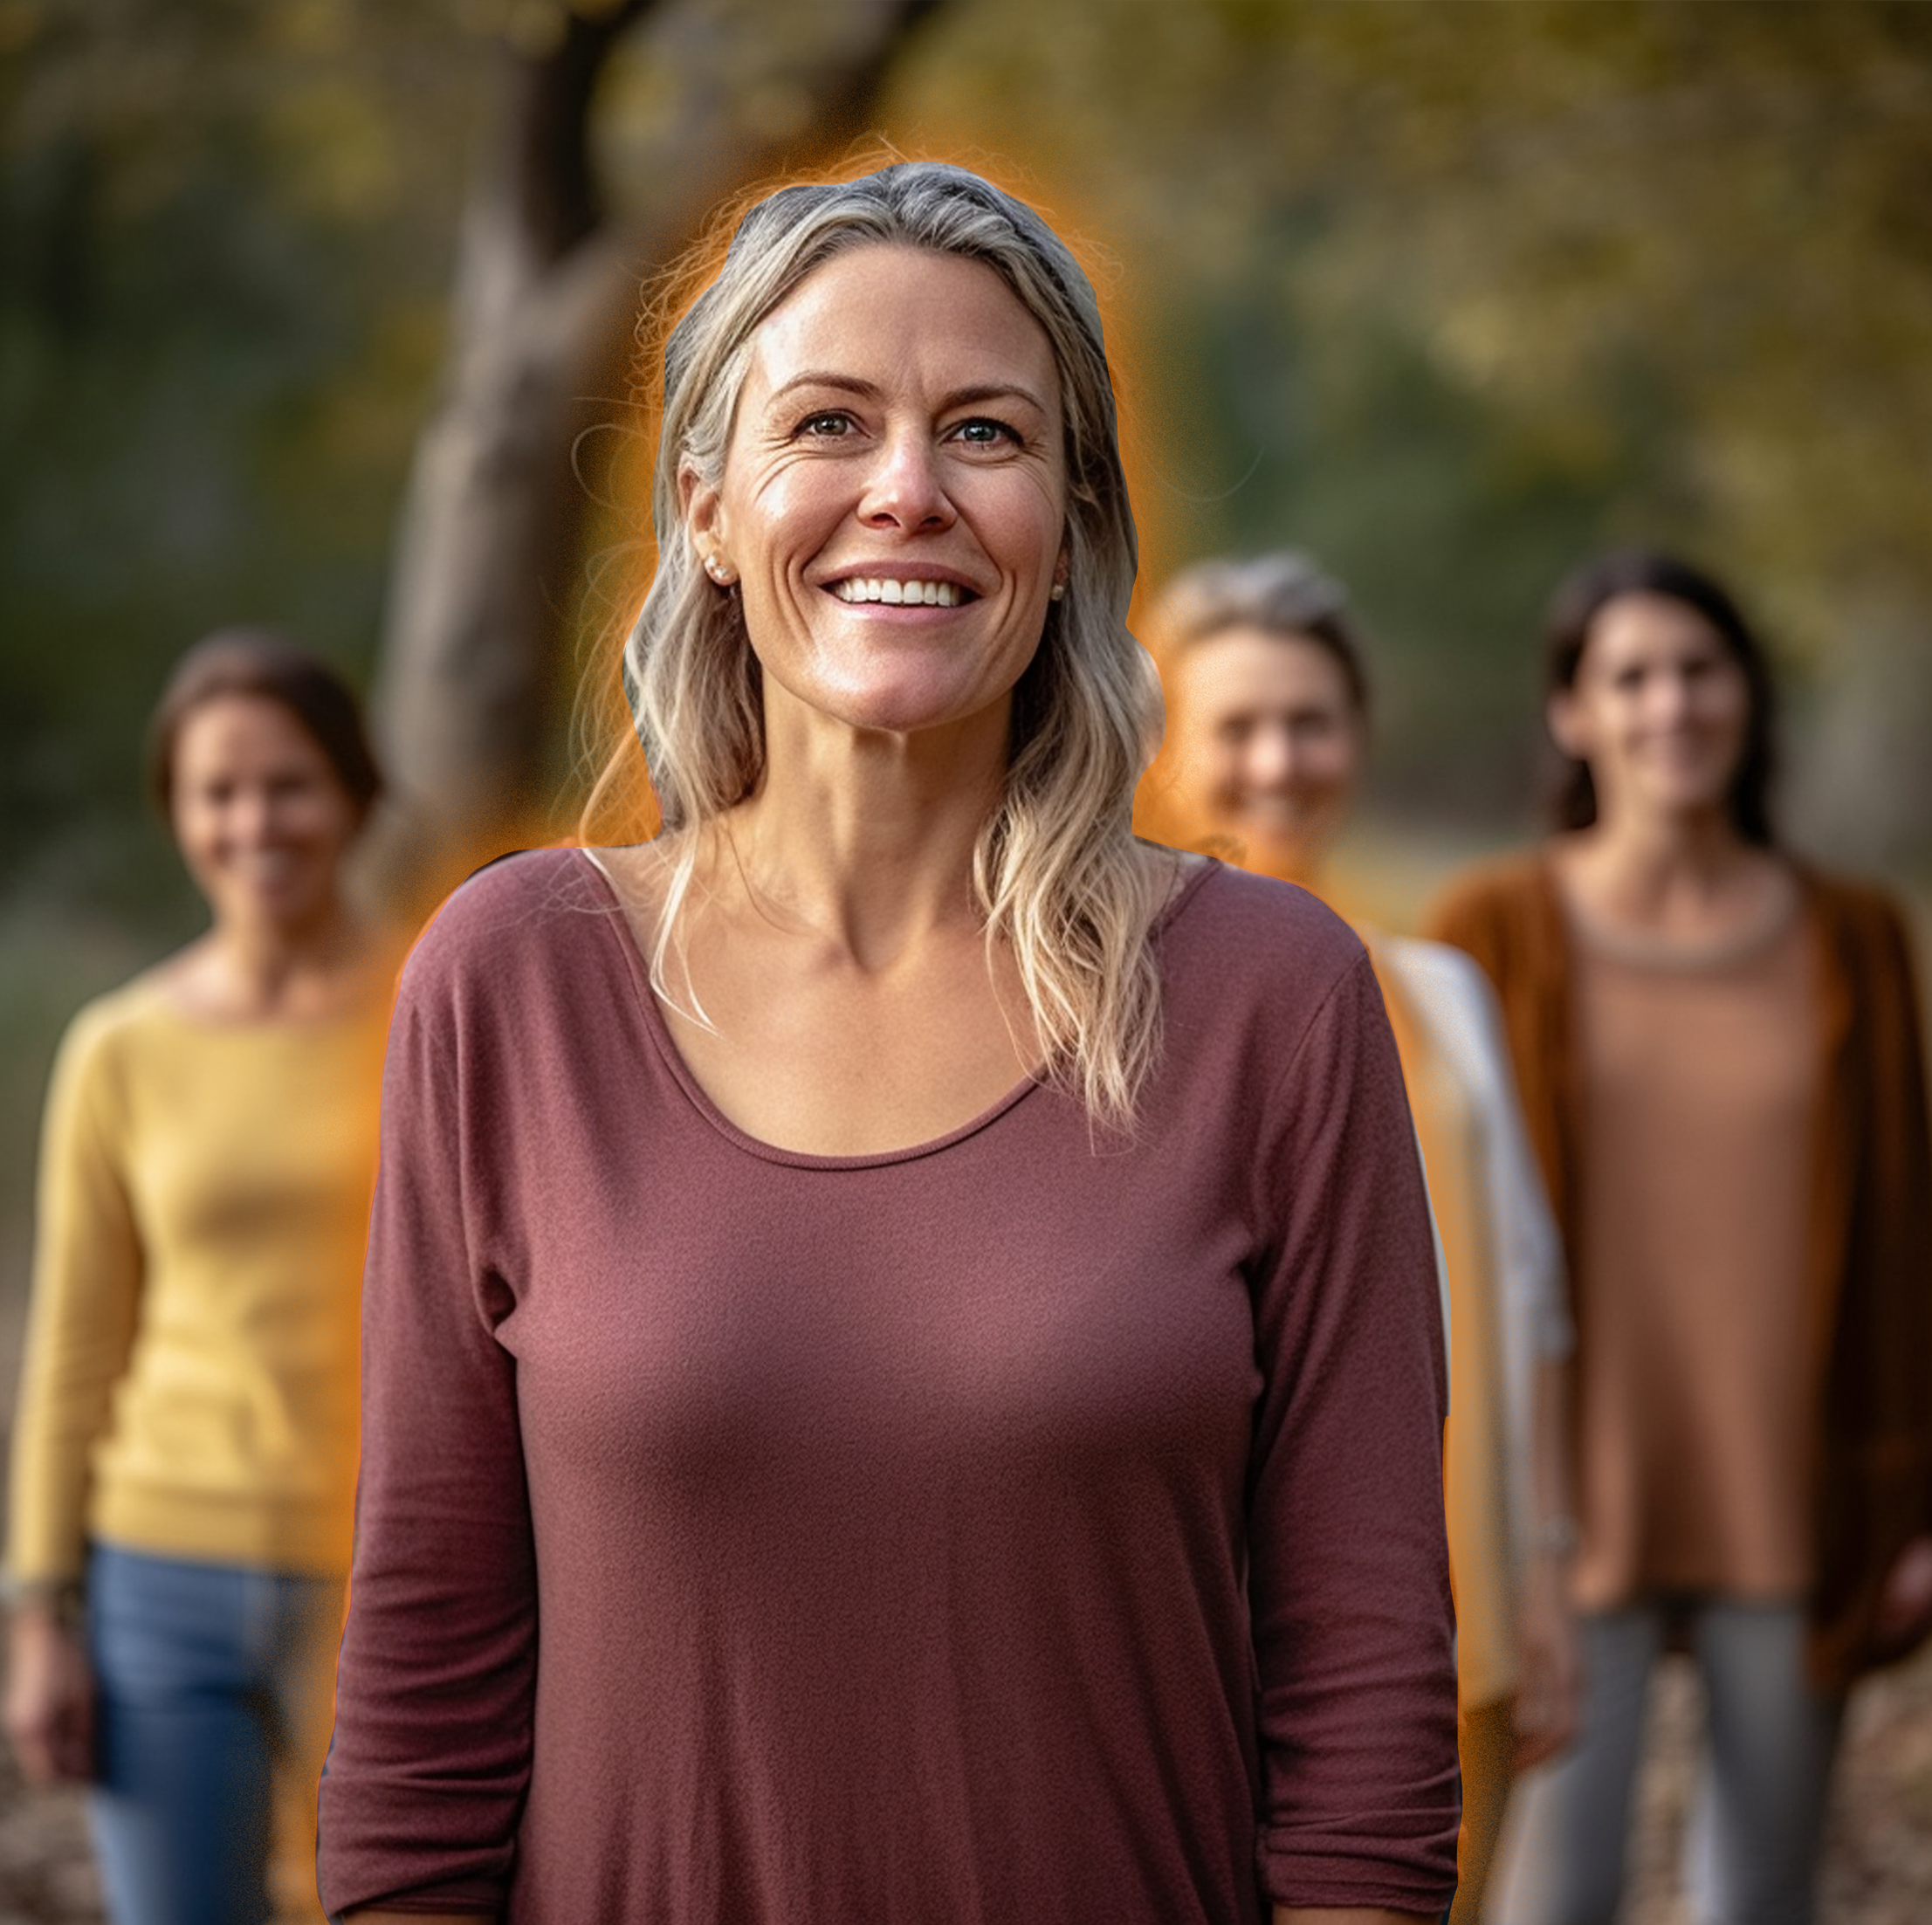 Introducing the Menopause Clinic at DexaStrong